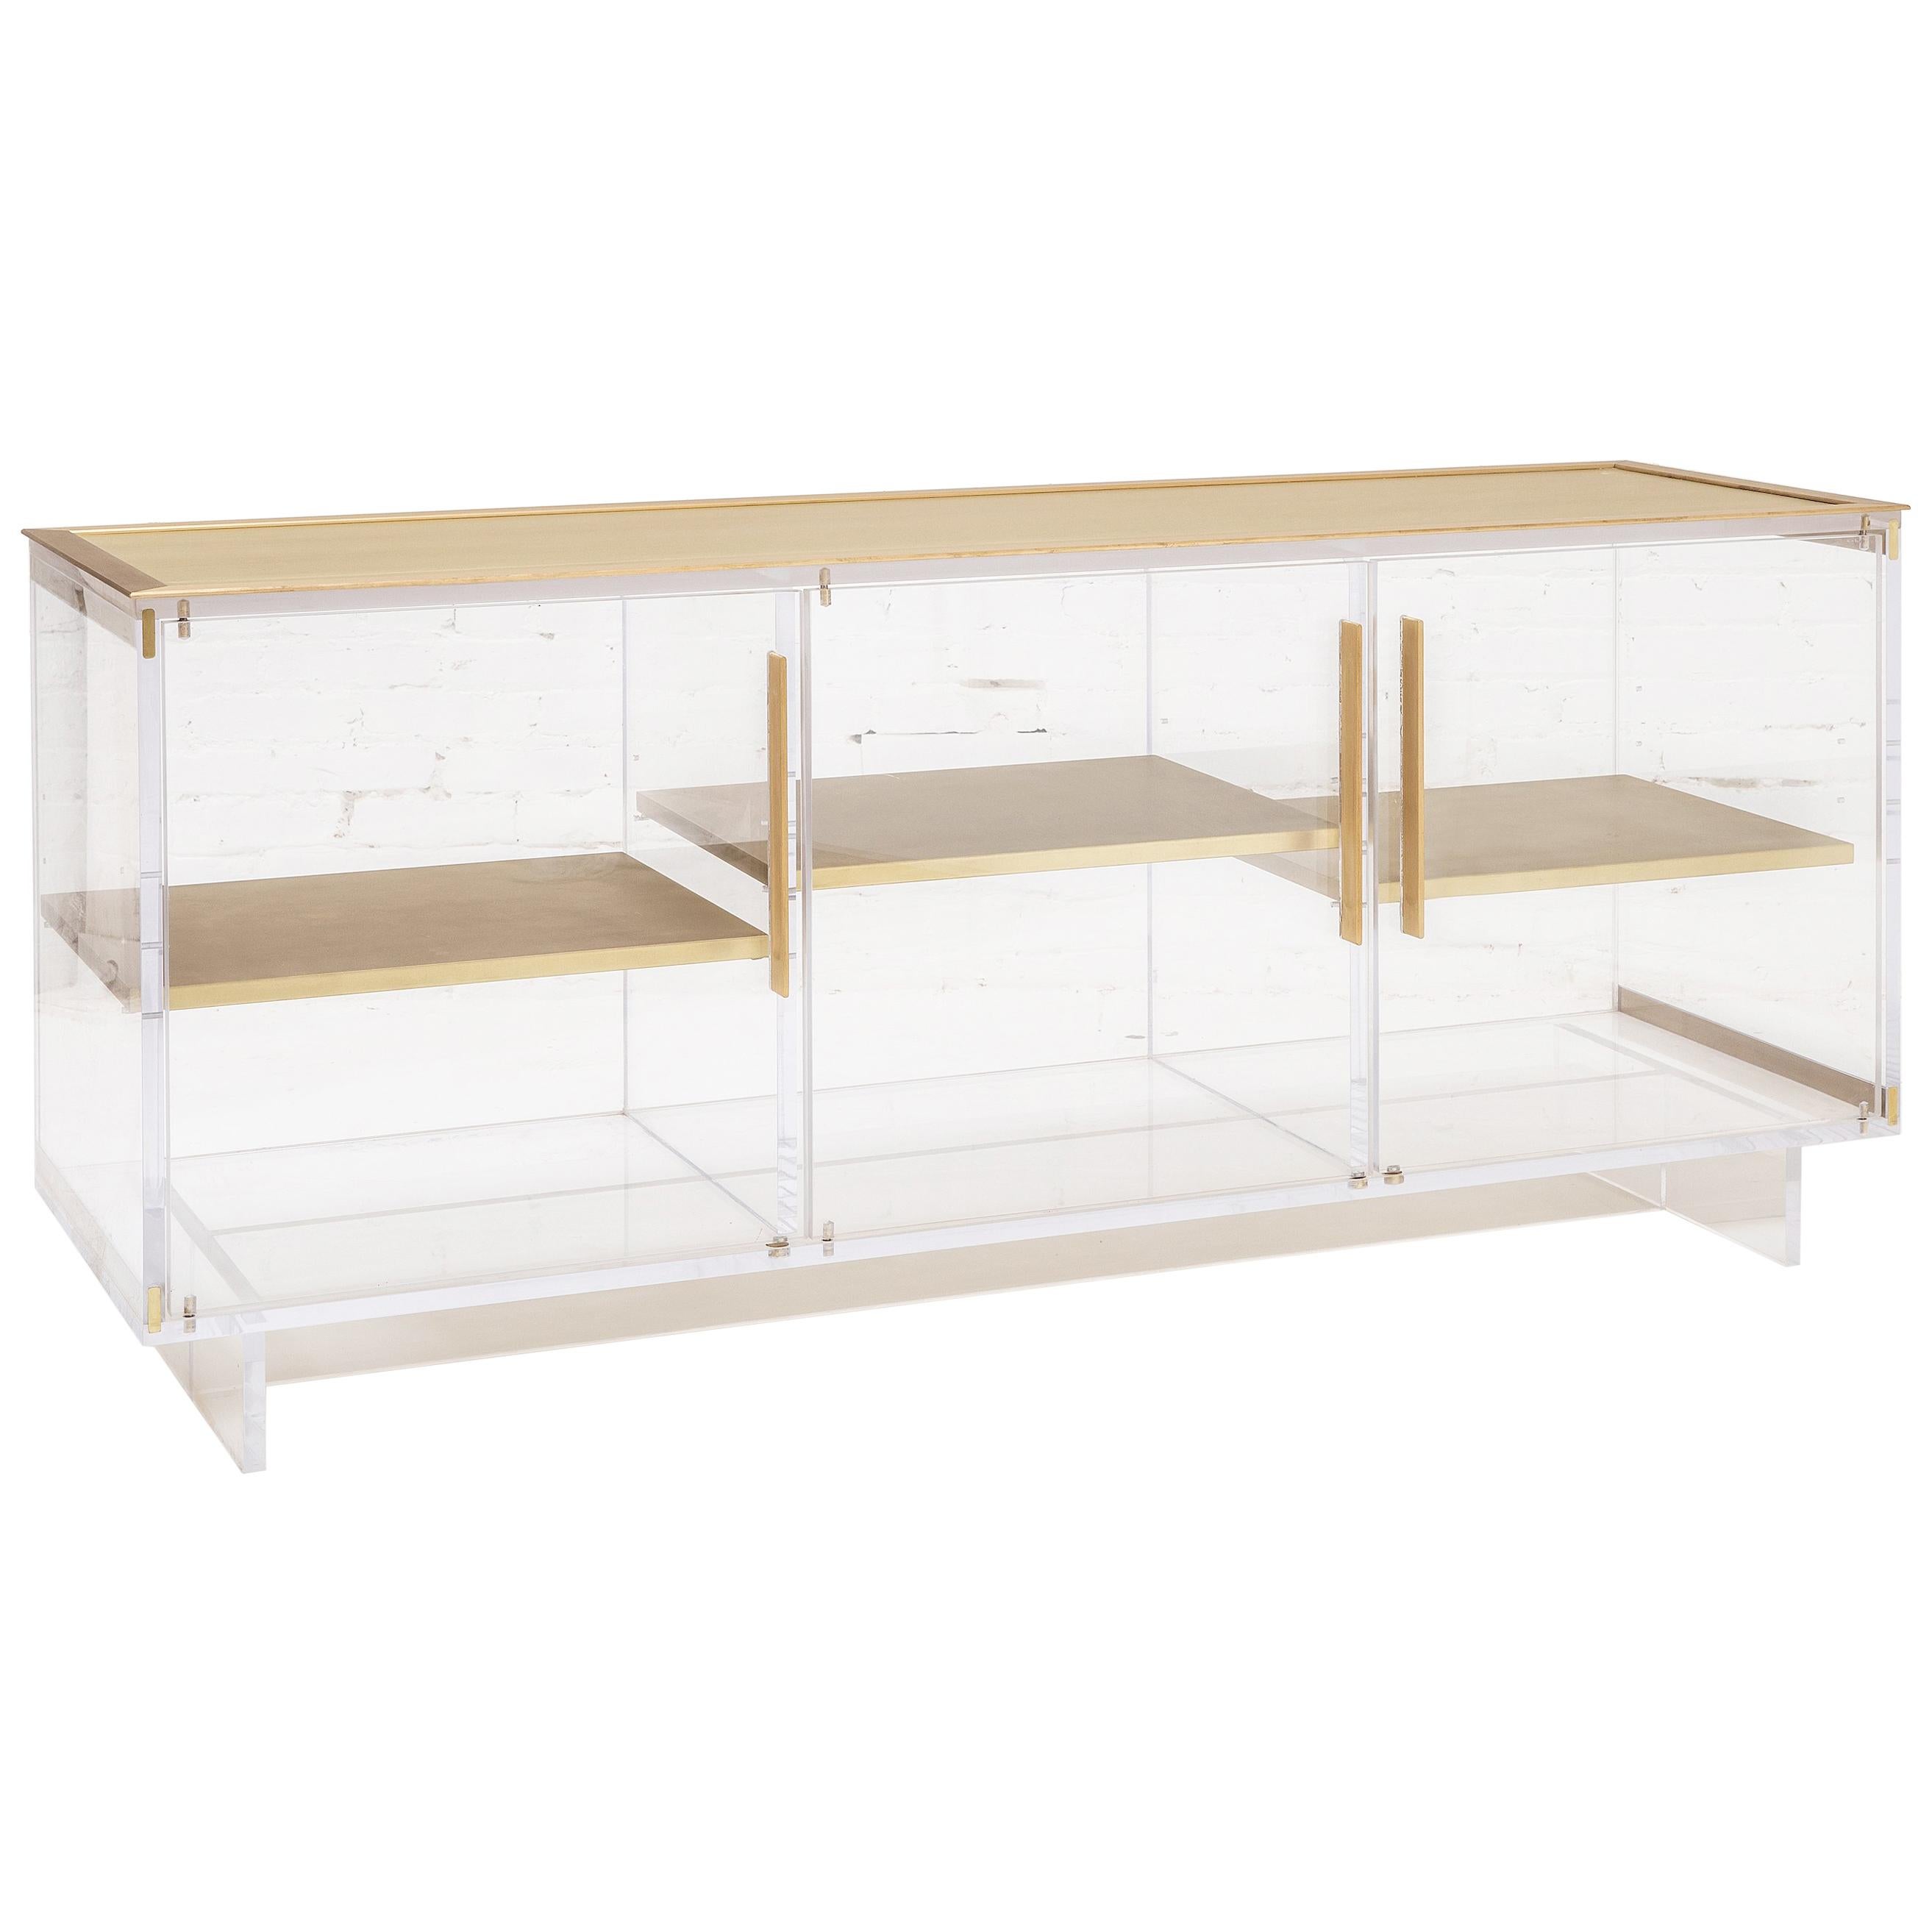 Custom Lucite sideboard with three adjustable brass shelves and brass top and pull handles by Reeve Schley.